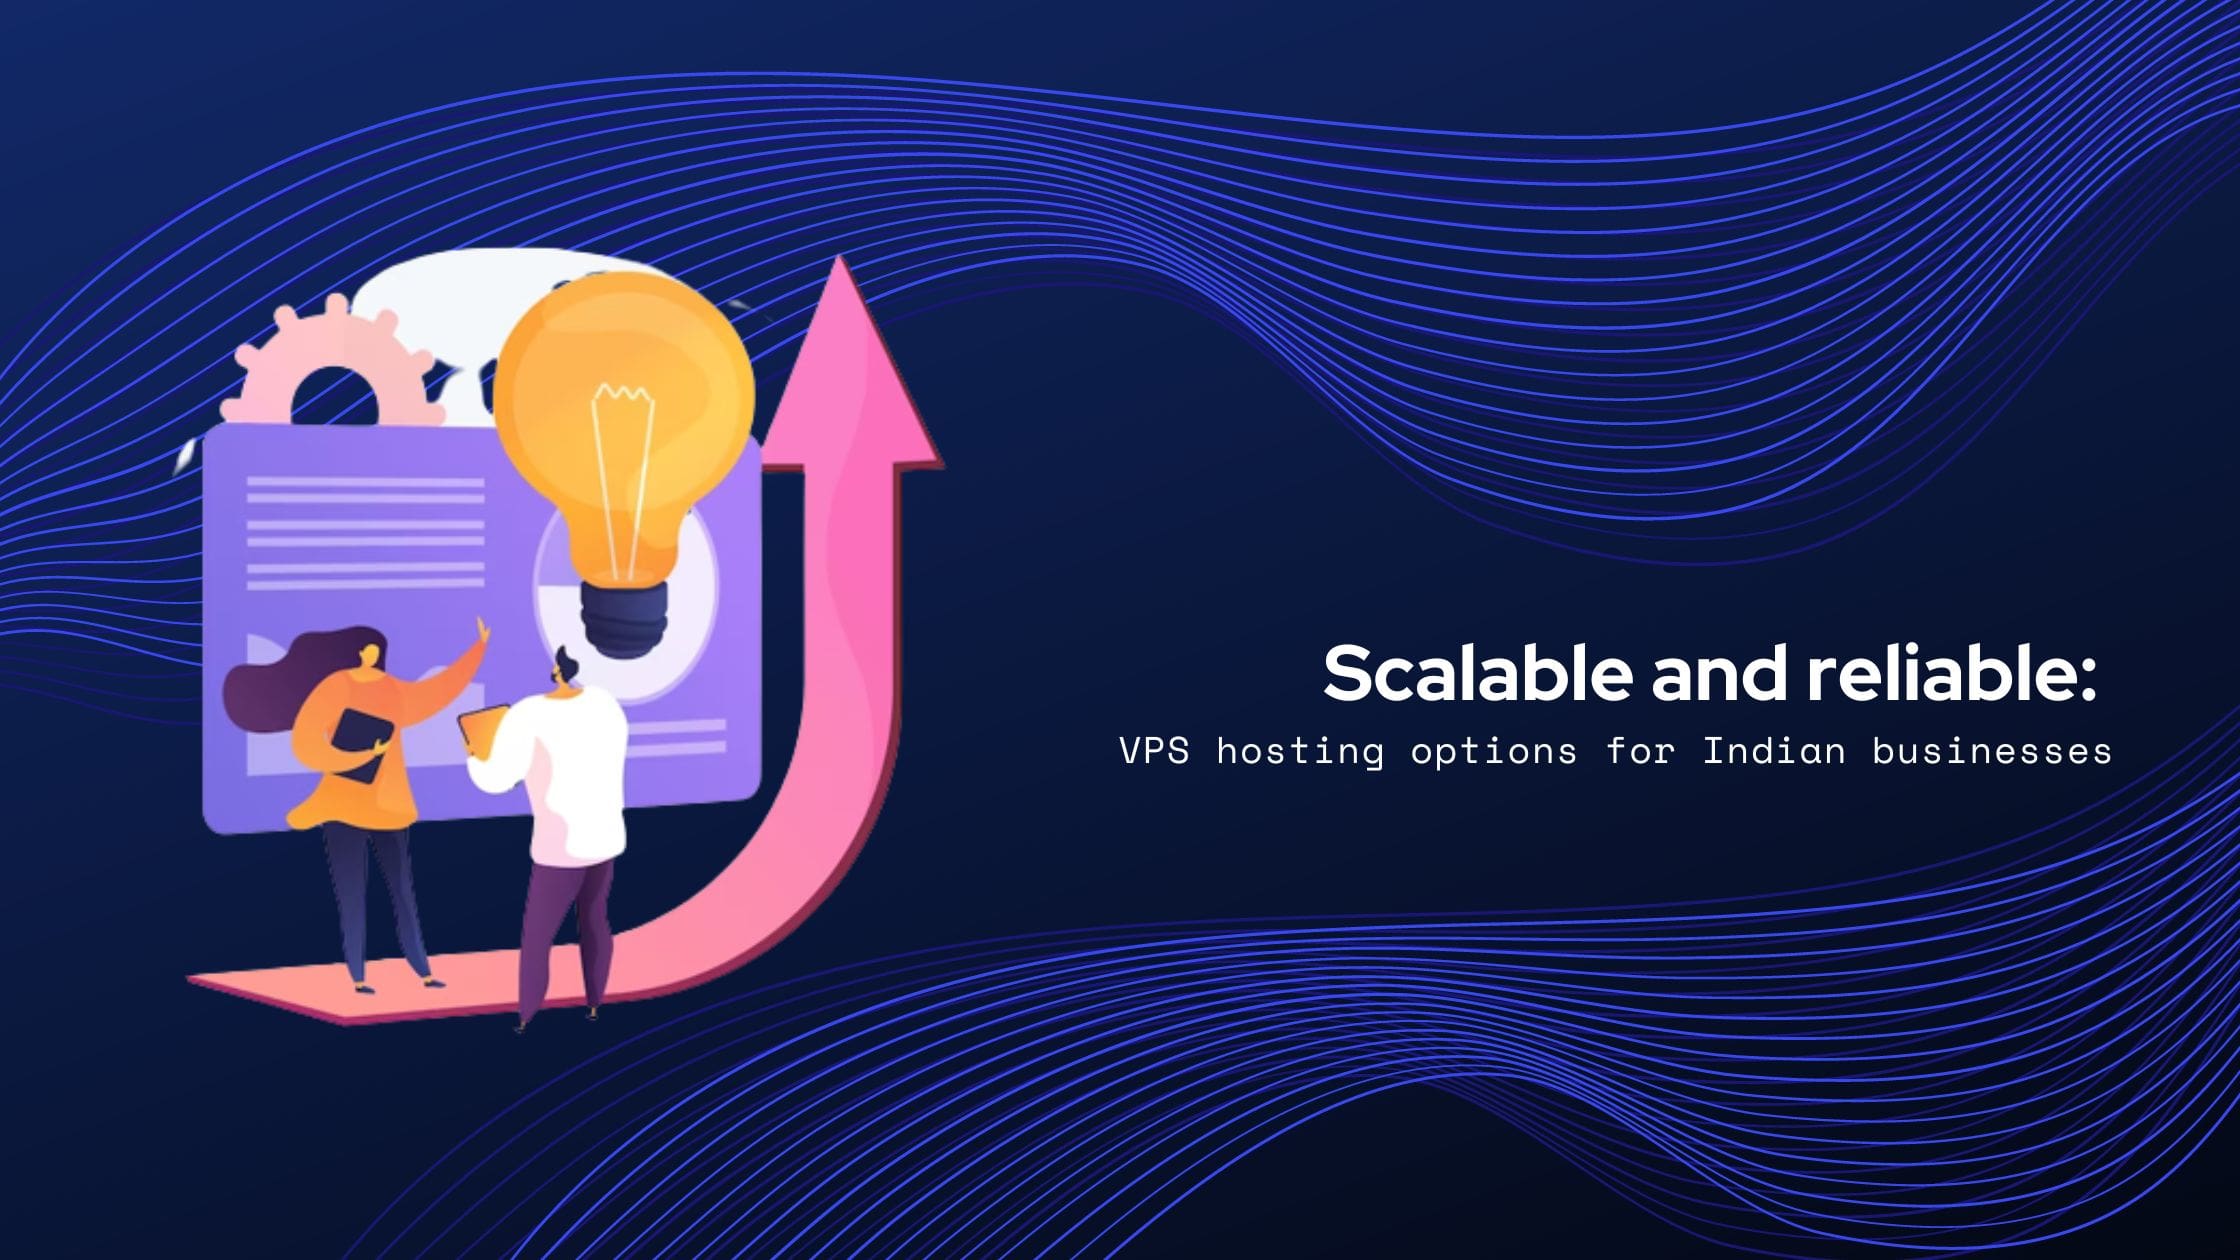 Scalable and reliable VPS hosting options for Indian businesses